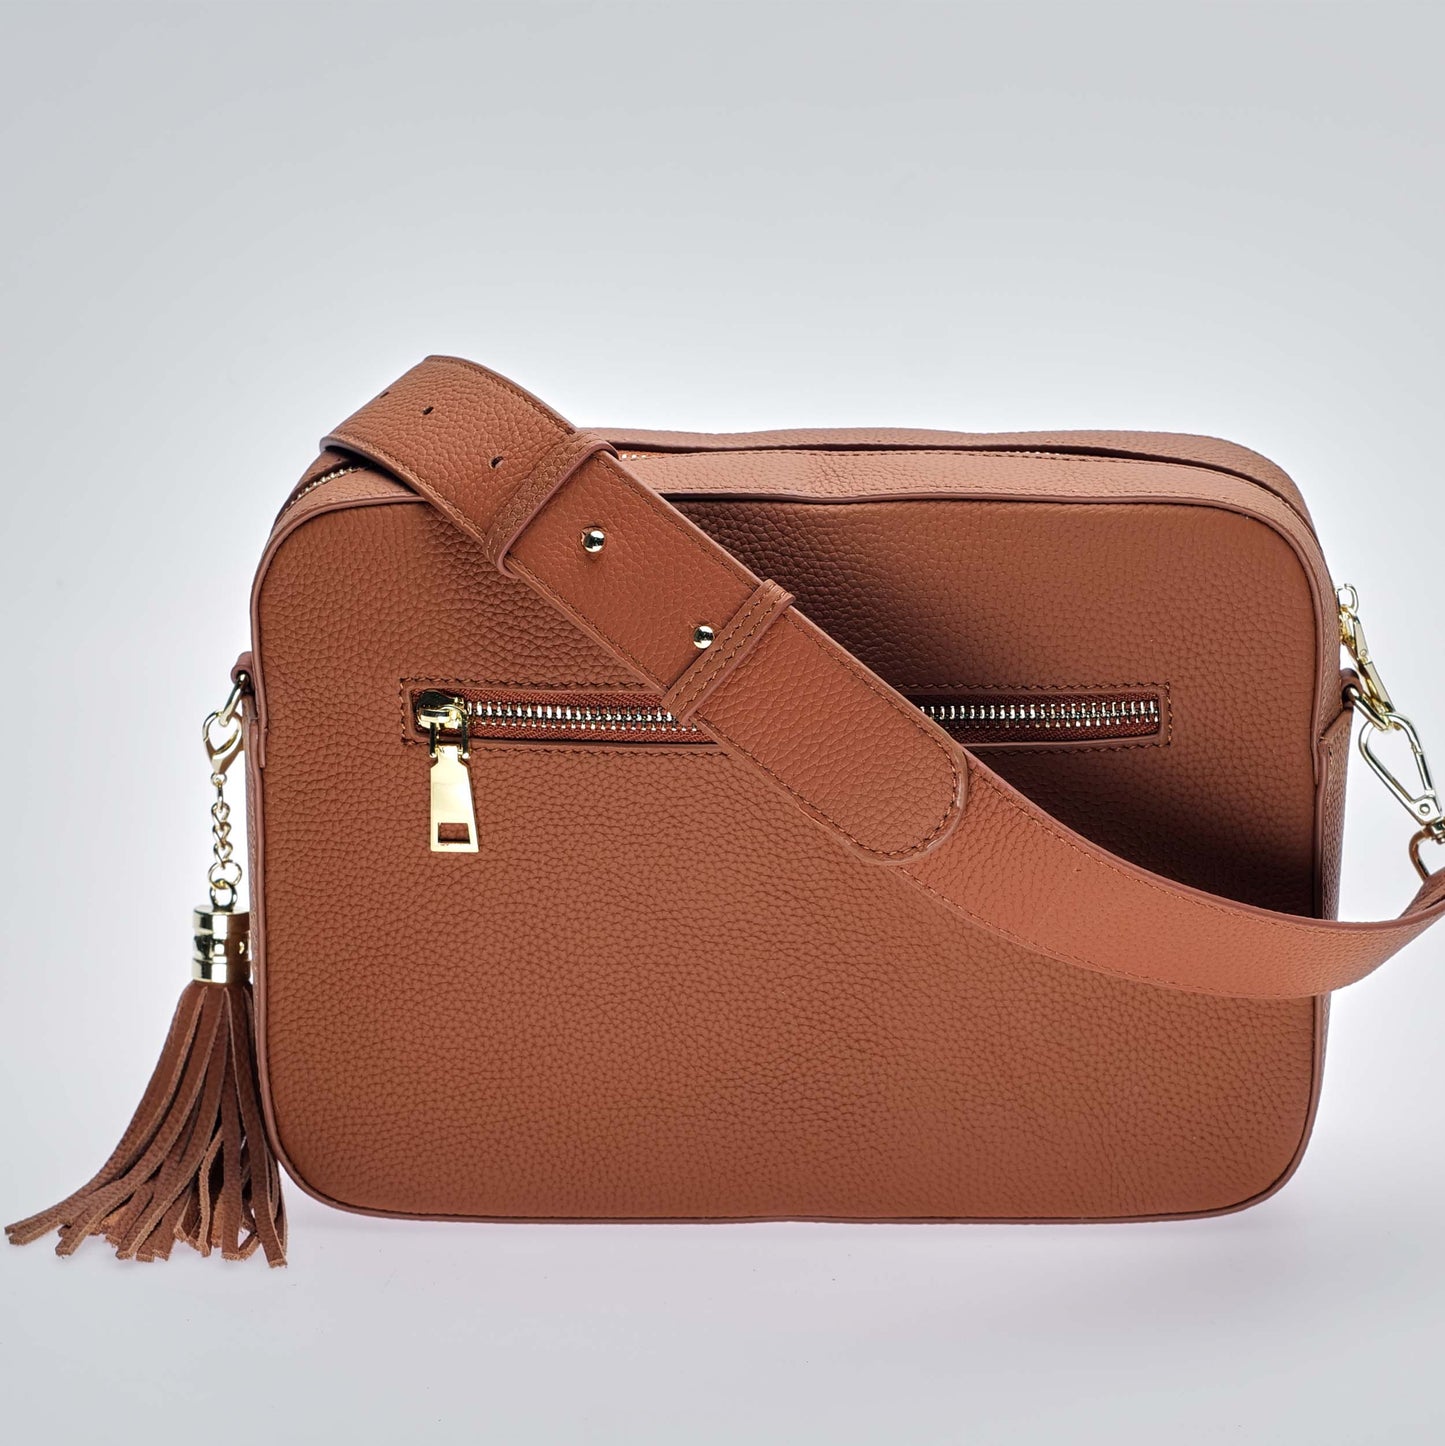 Stratford XL Crossbody Bag - Tuscan Tan with Matching Leather Strap